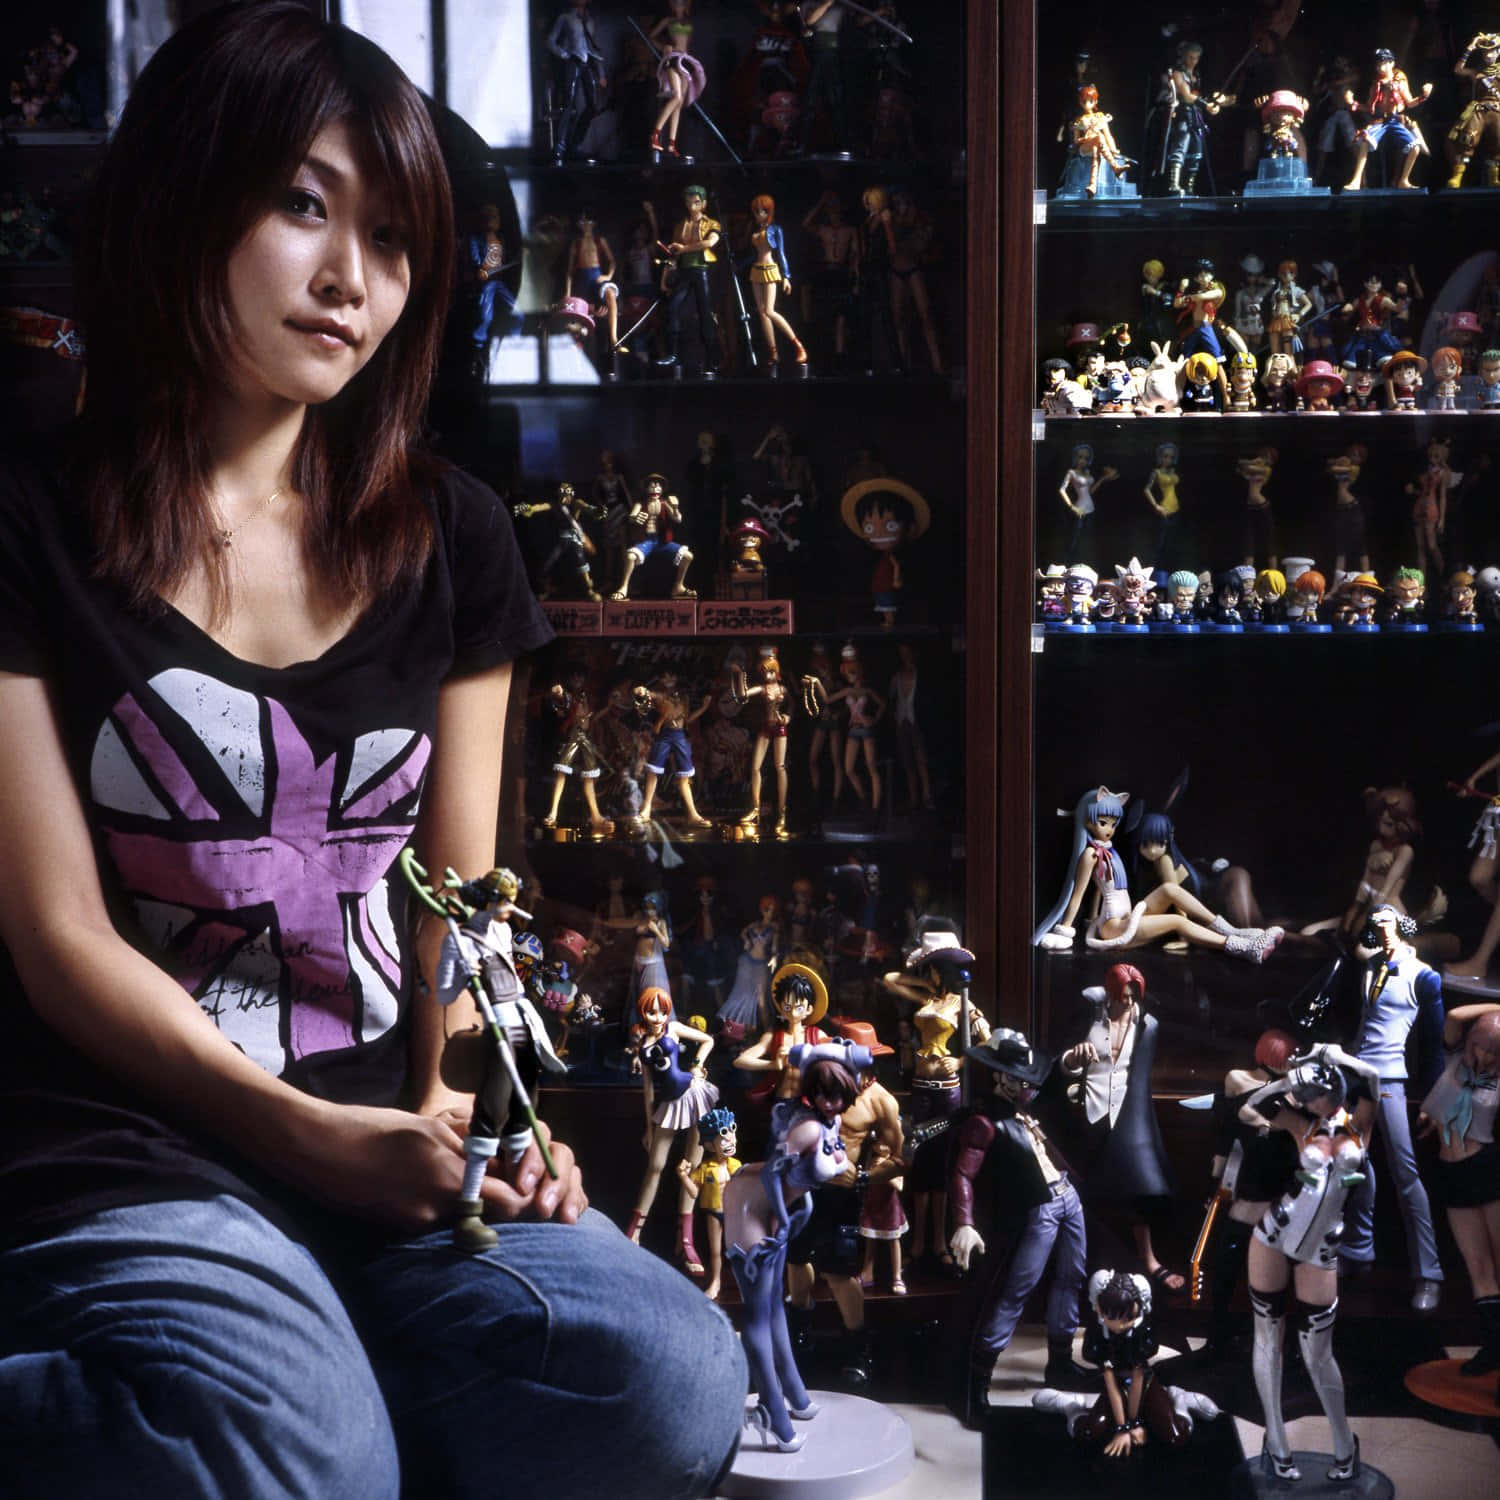 "A passionate otaku with their growing collection of anime merchandise." Wallpaper